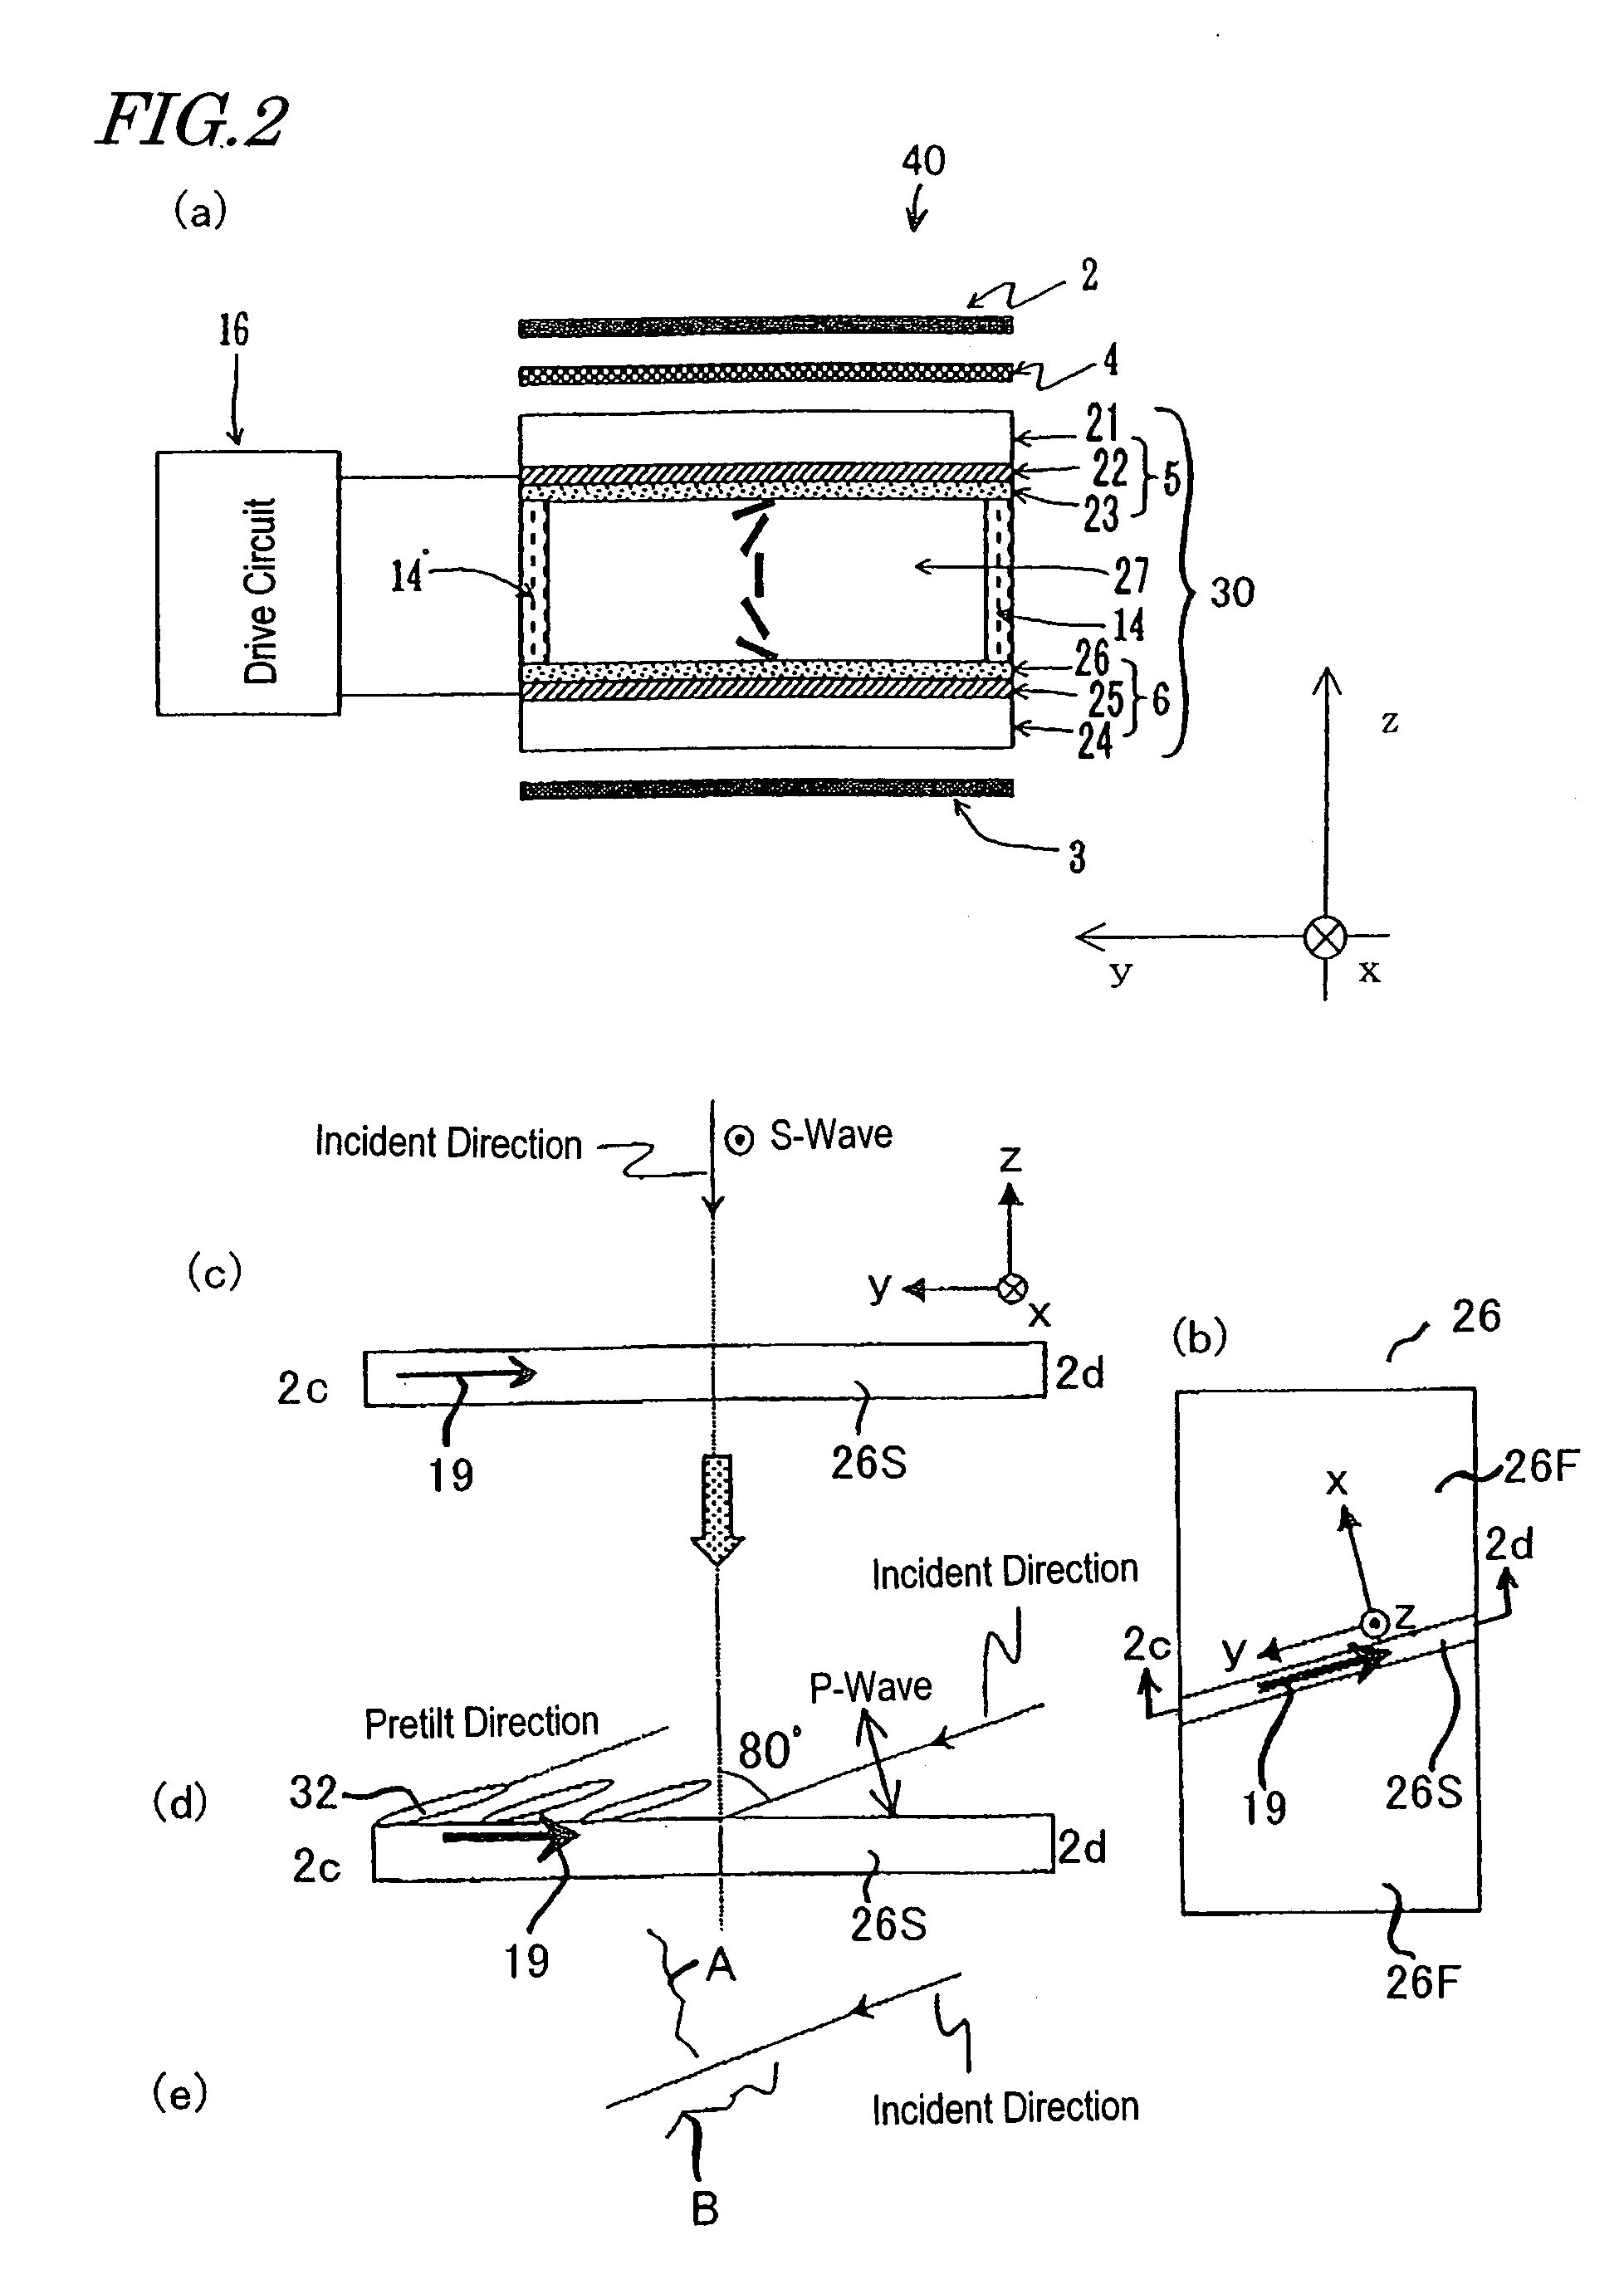 Liquid crystal display device comprising a TN alignment region continuously connectable with a bend alignment region, each region having a different pretilt direction and the method of fabricating the same